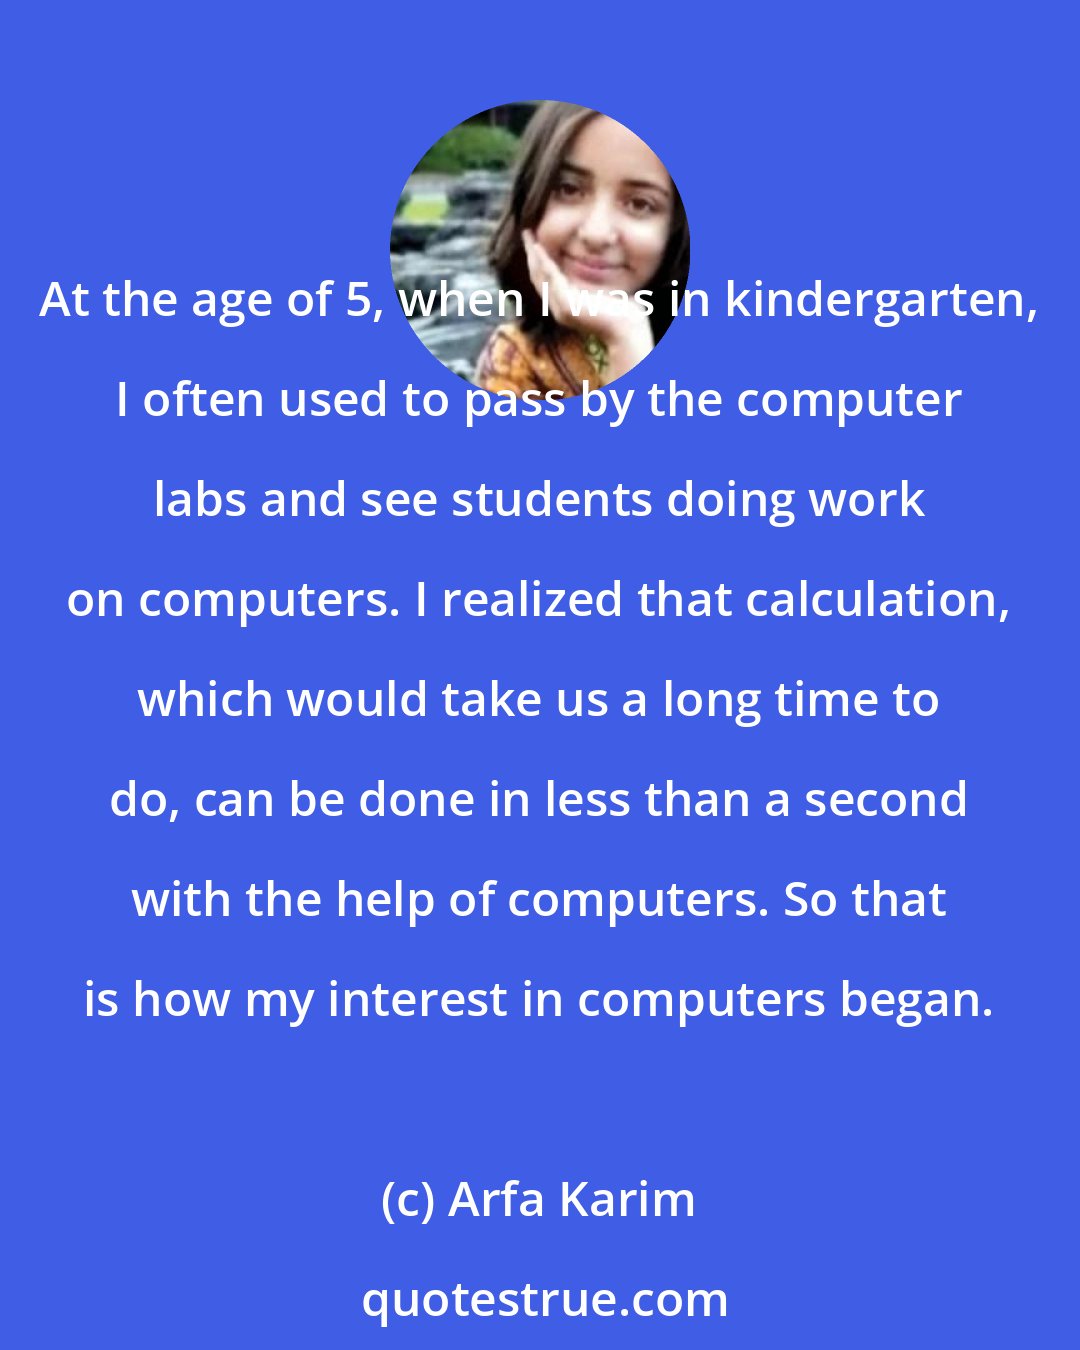 Arfa Karim: At the age of 5, when I was in kindergarten, I often used to pass by the computer labs and see students doing work on computers. I realized that calculation, which would take us a long time to do, can be done in less than a second with the help of computers. So that is how my interest in computers began.